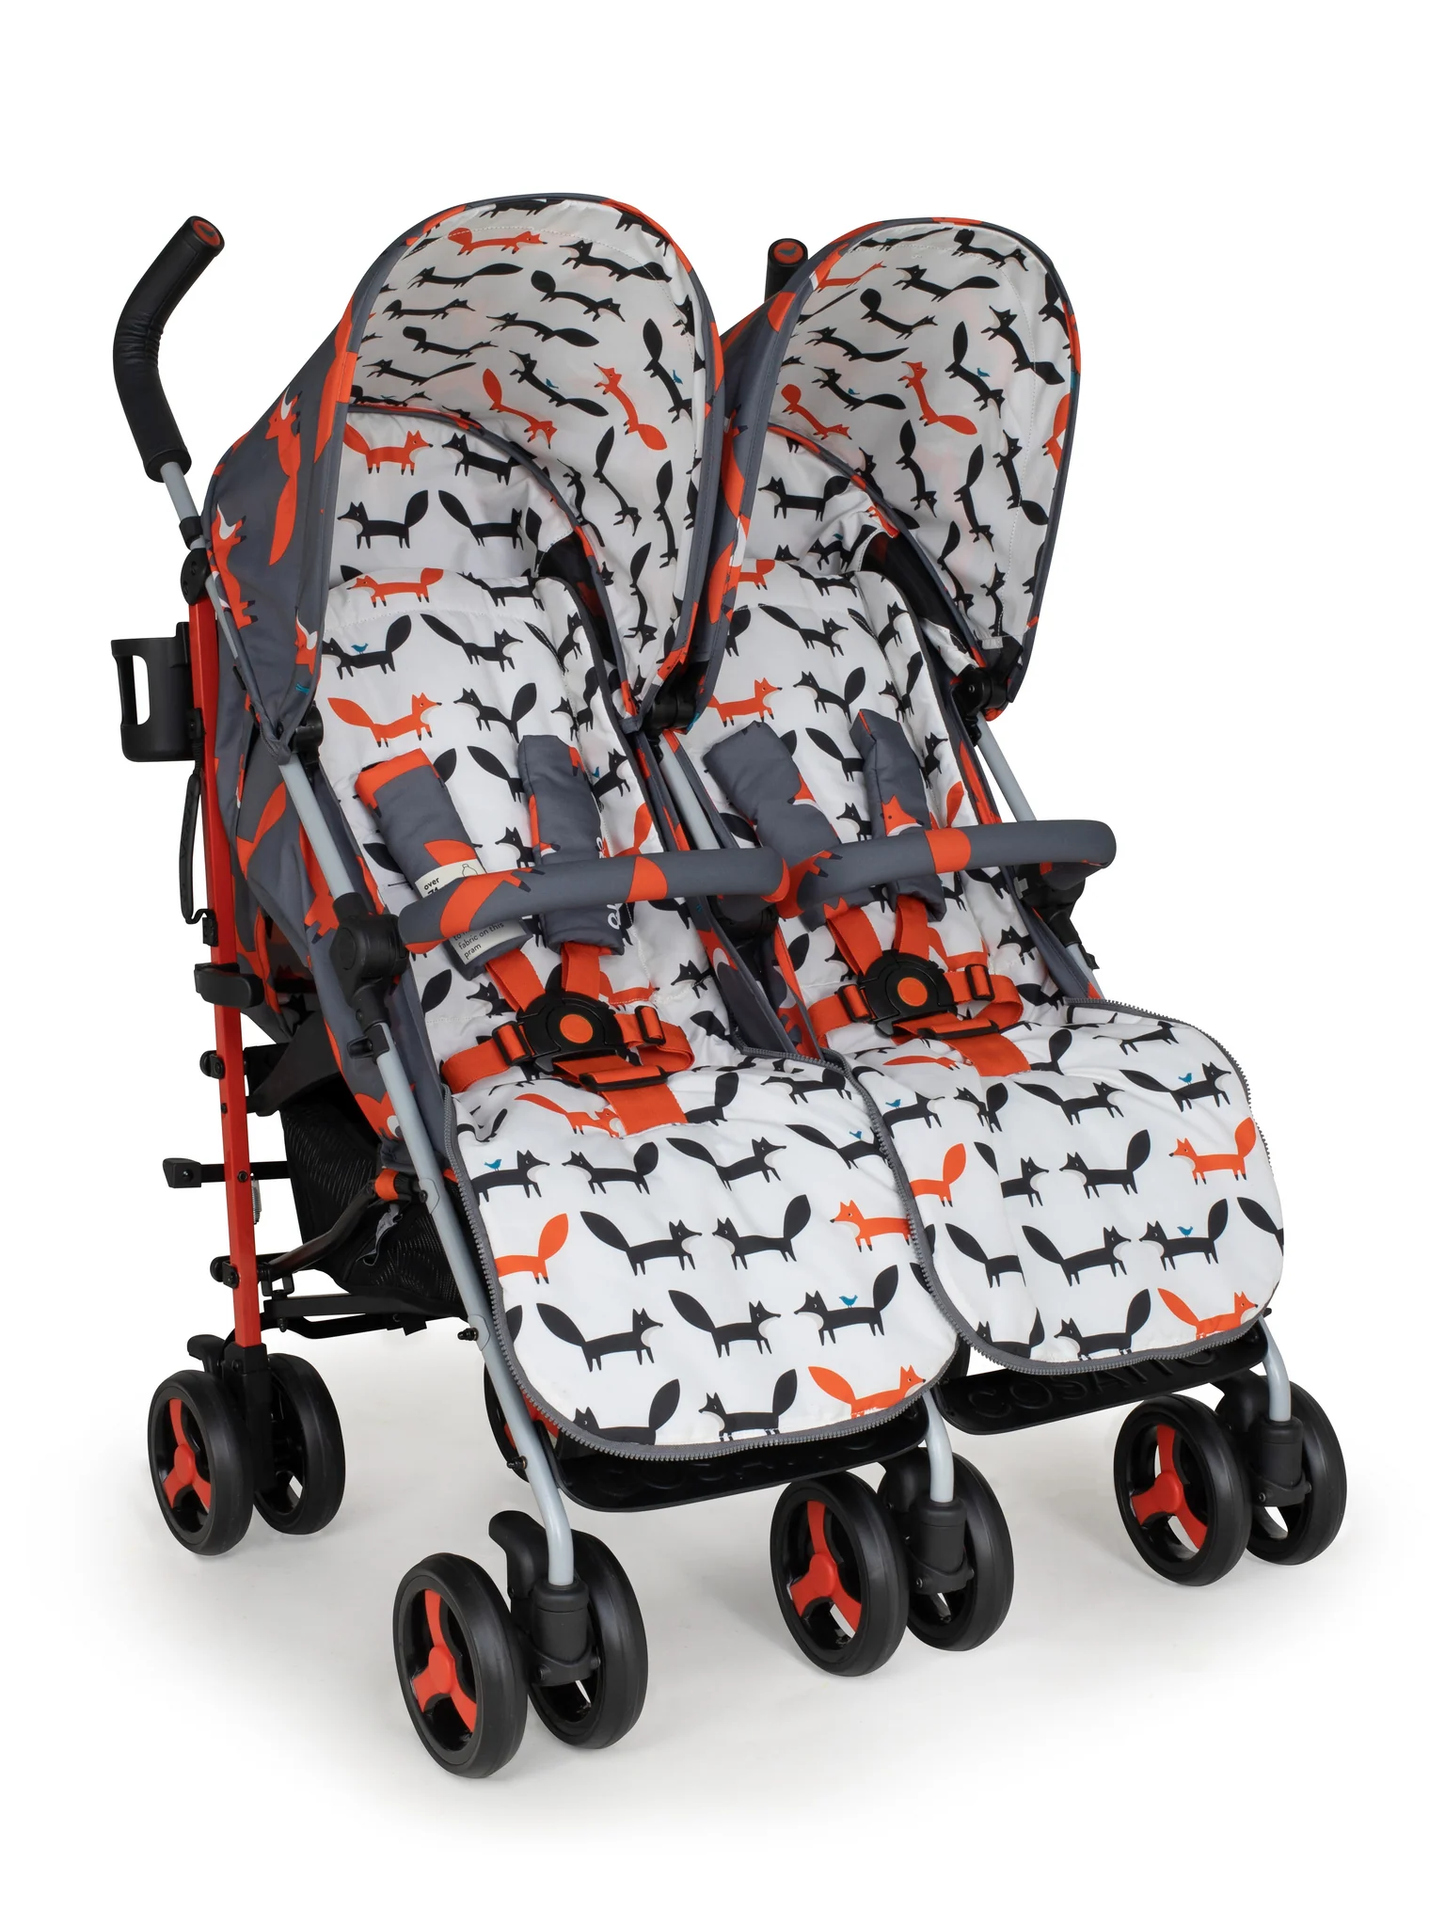 Cosatto Supa Dupa 3 Double Stroller - Charcoal Mister Fox-3